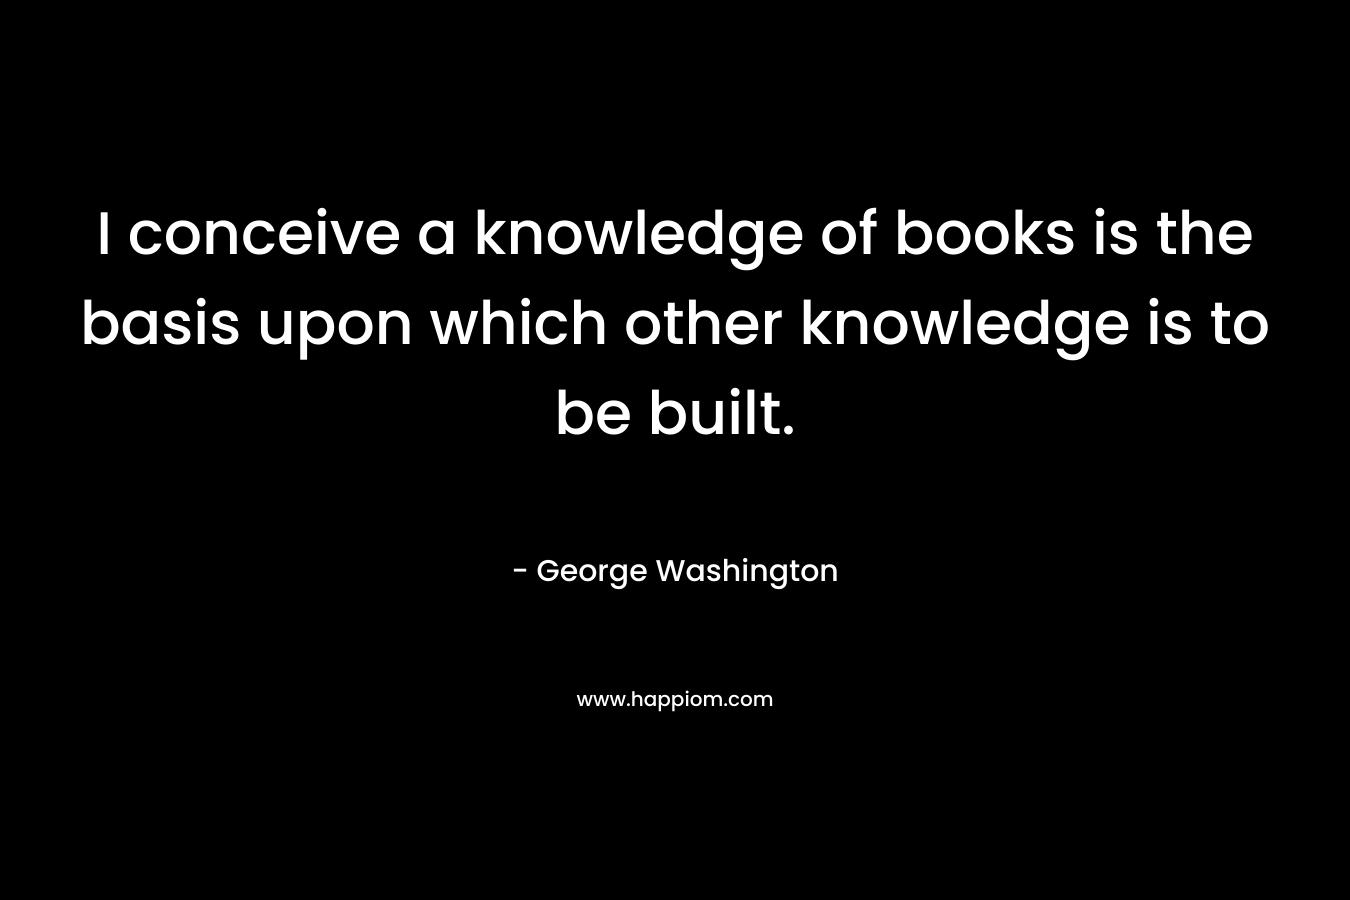 I conceive a knowledge of books is the basis upon which other knowledge is to be built.